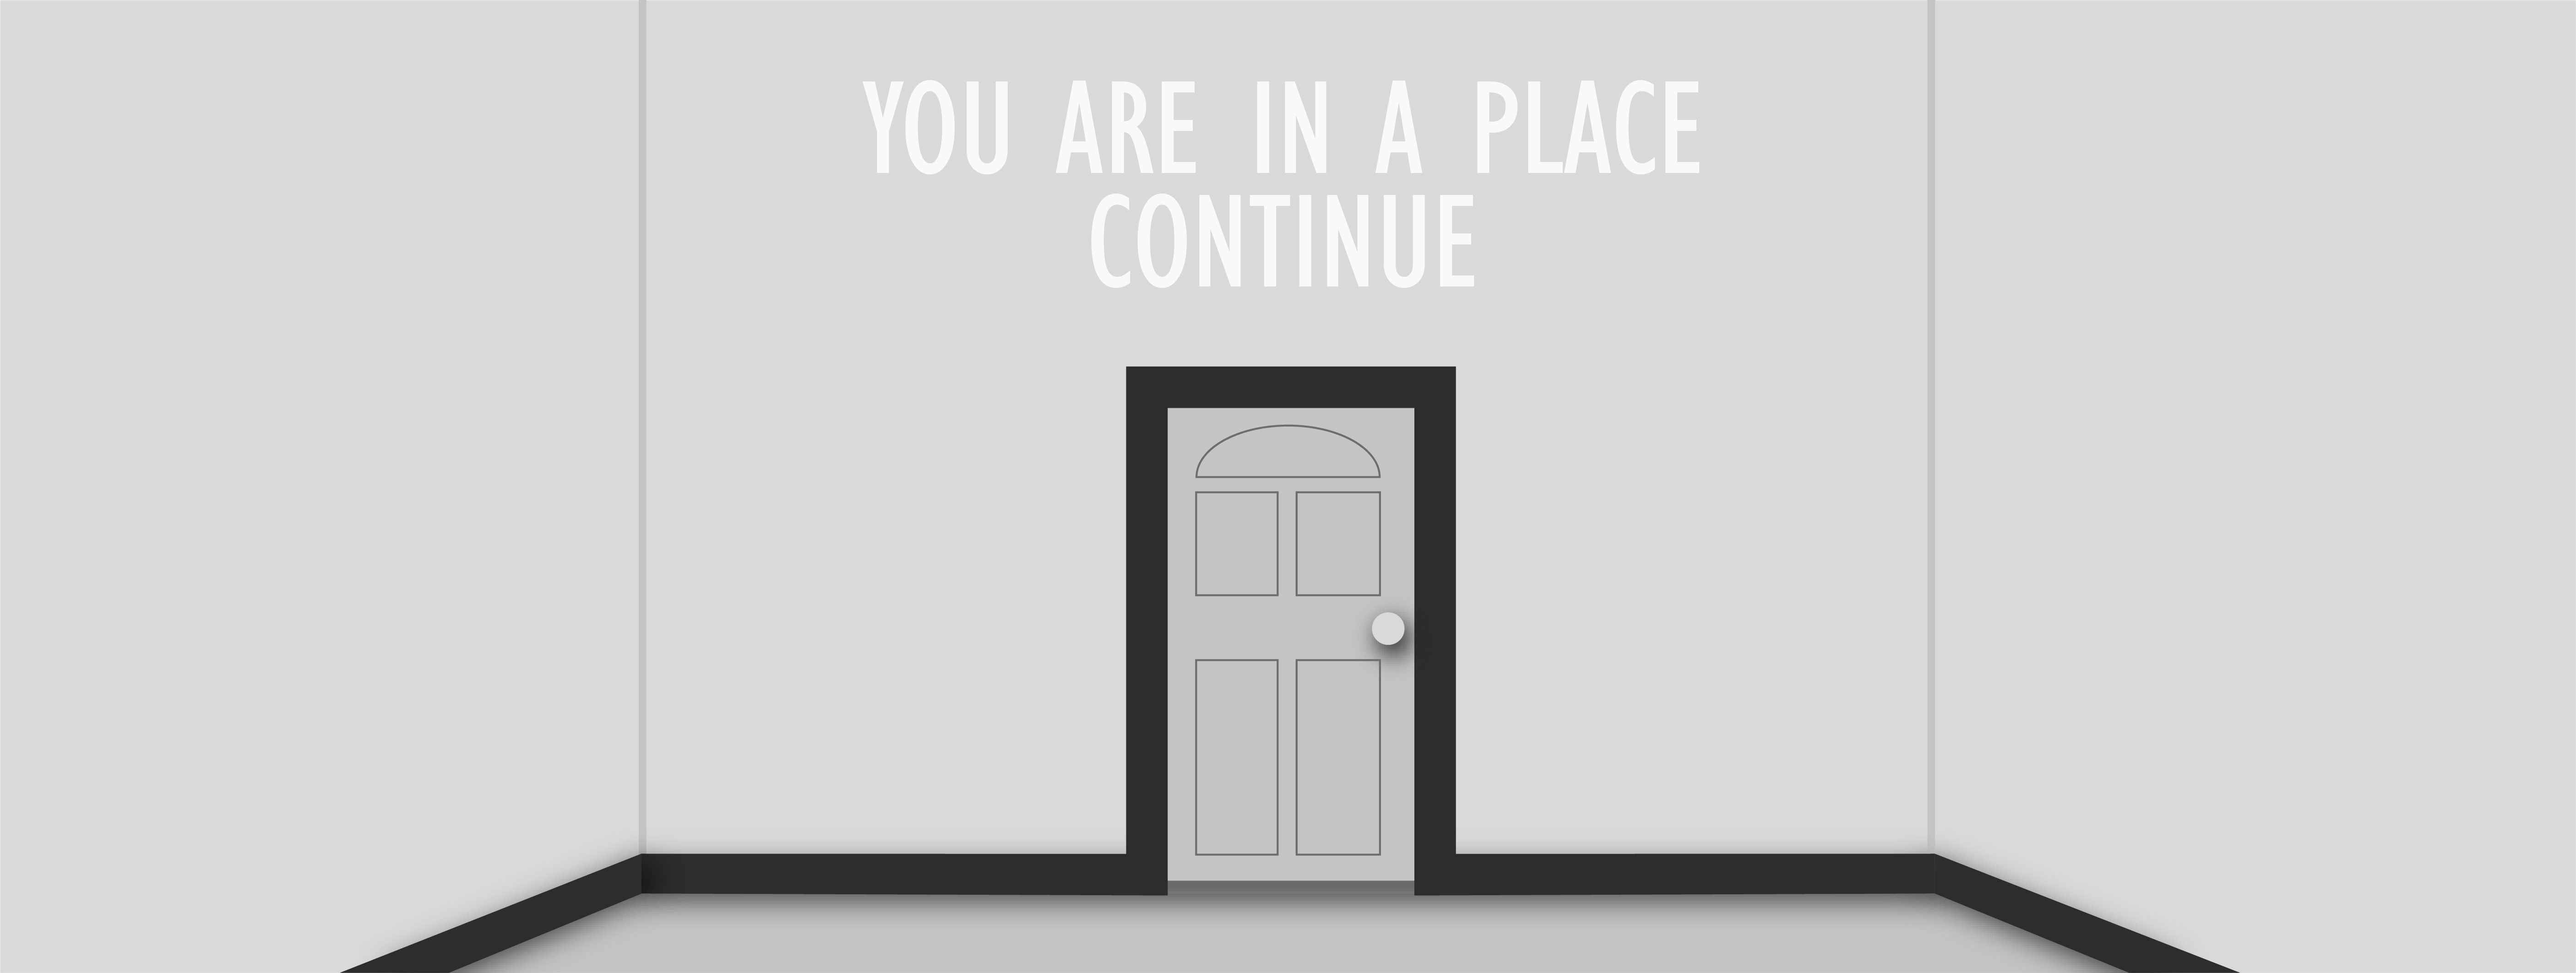 Image of a single door. Text above door reads 'YOU ARE IN A PLACE', 'CONTINUE'.